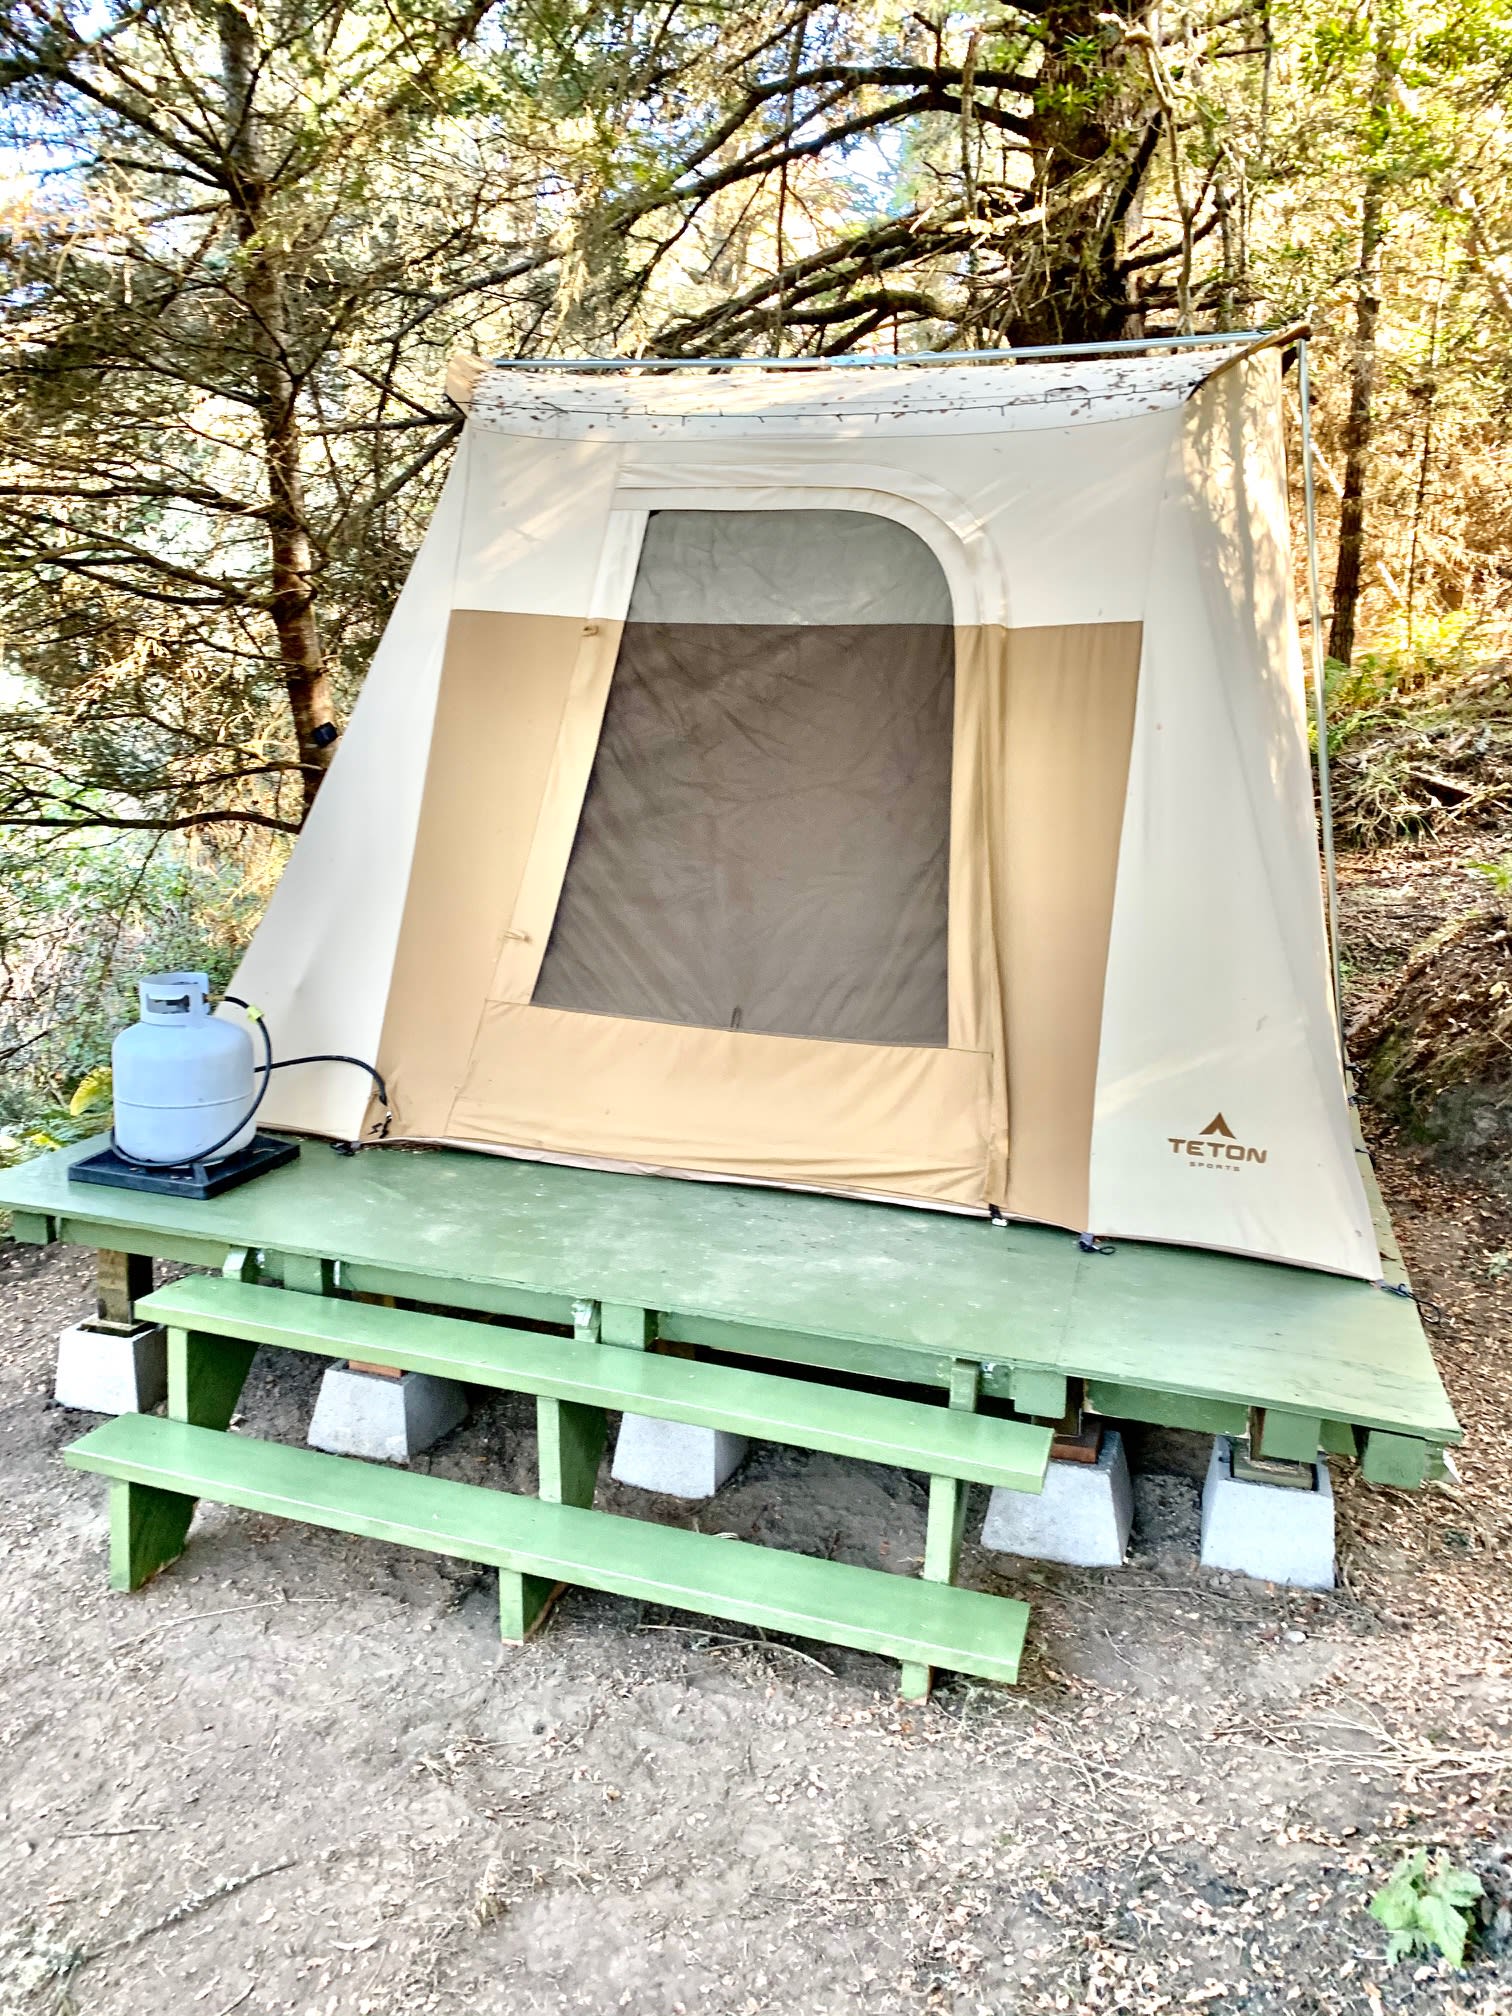 Your brand new 10 x 10 canvas tent on a platform.  A propane fireplace inside keeps you warm and cozy all night long..  